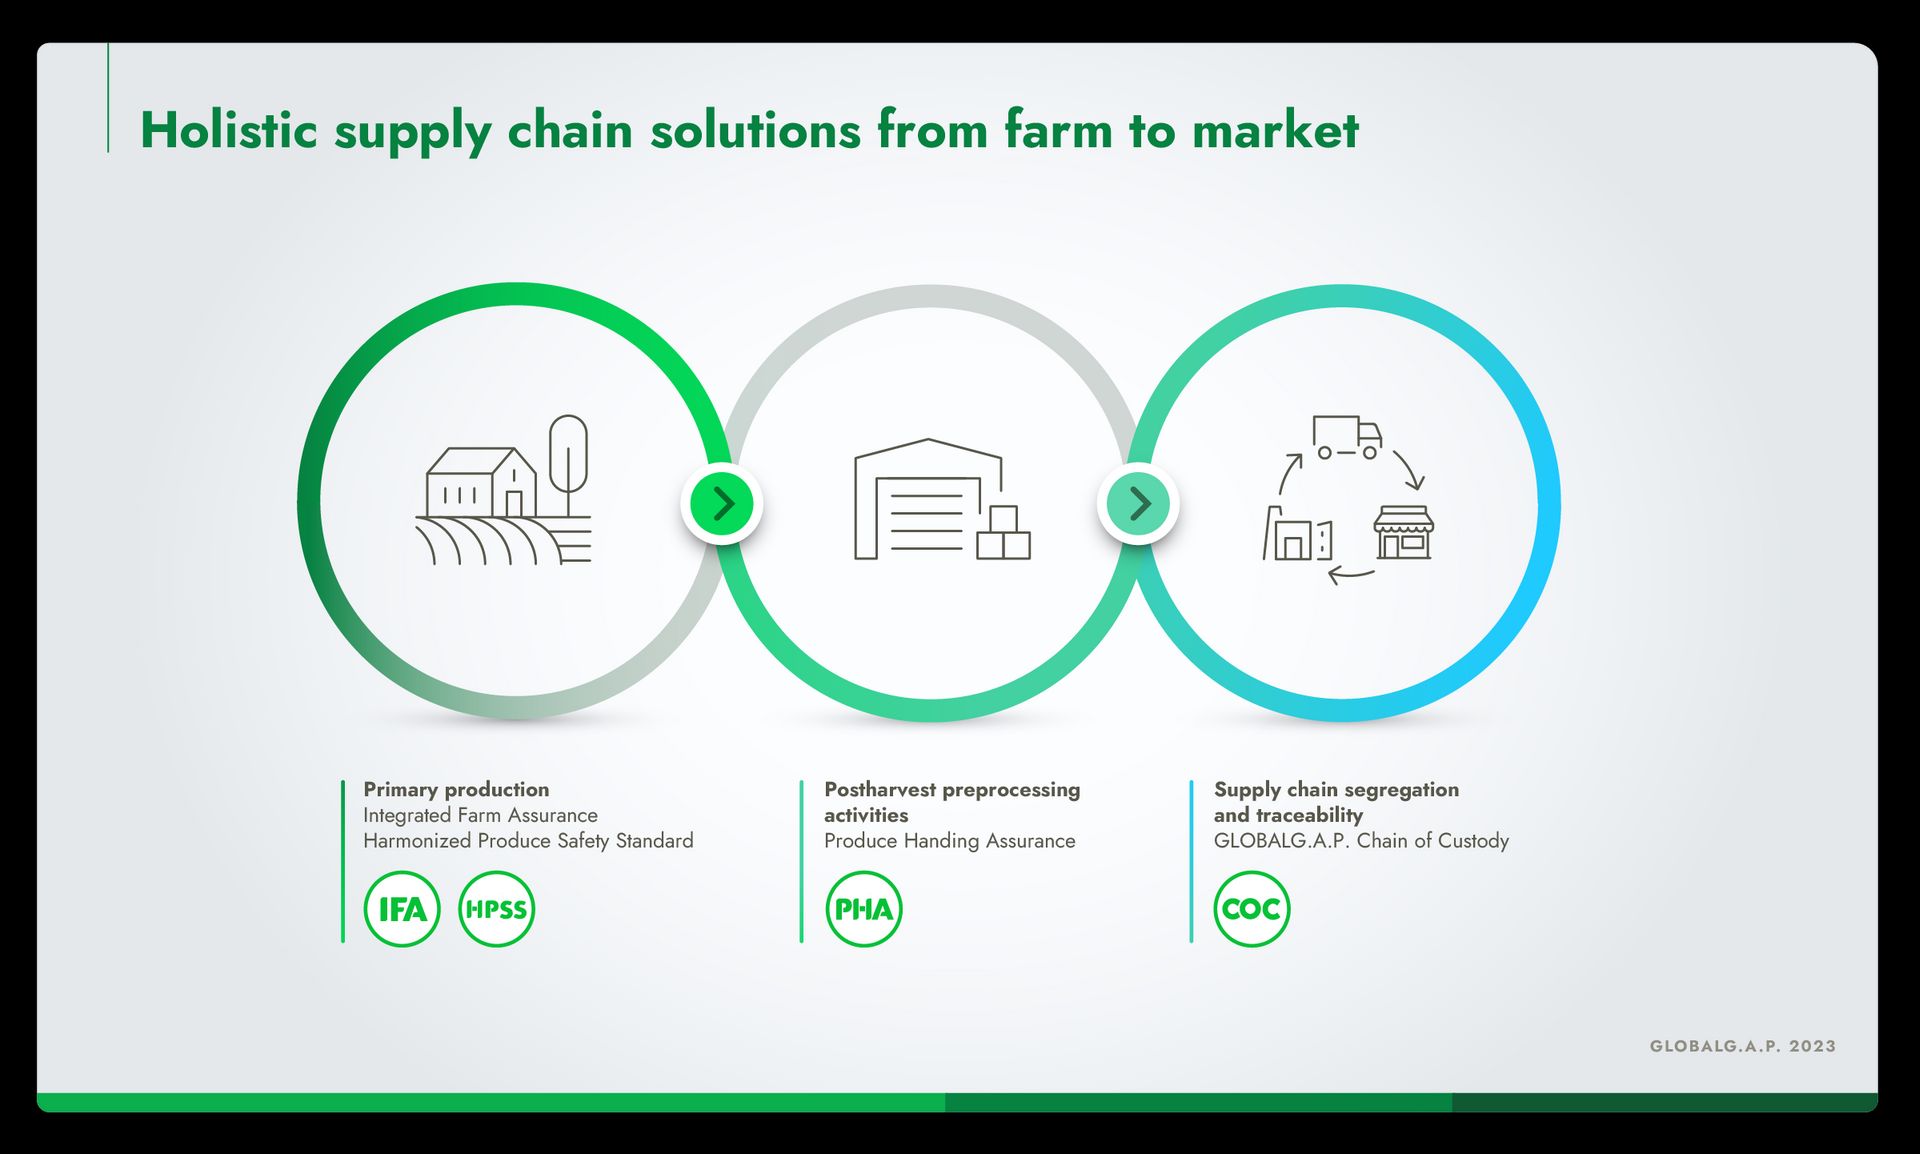 Infographic showing GLOBALG.A.P. solutions applicable to each stage of the supply chain